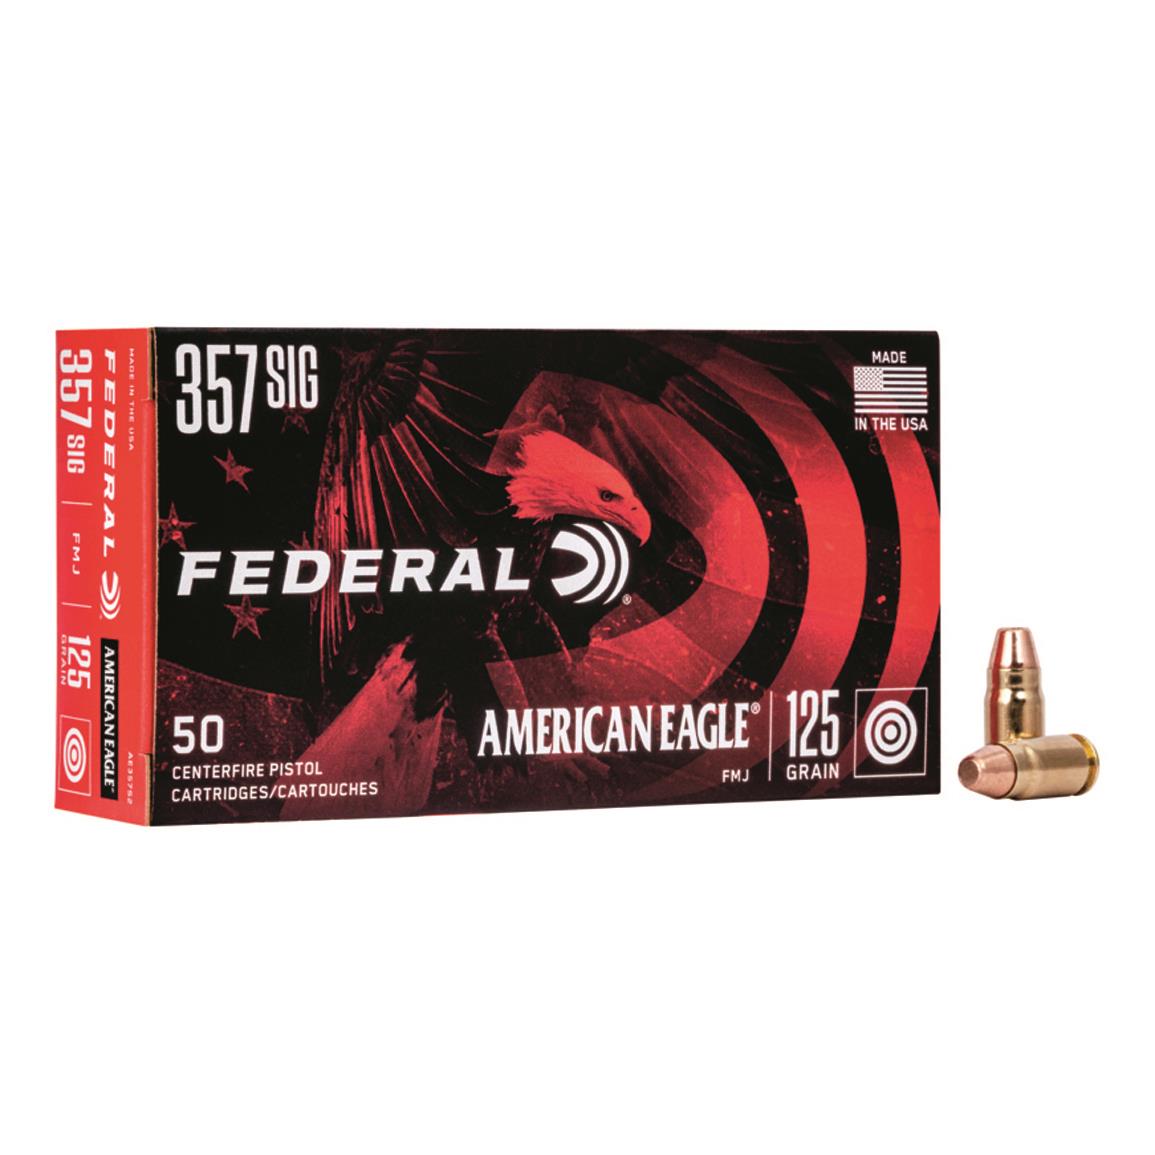 Federal, American Eagle Pistol, .357 Sig, FMJ, 125 Grain, 50 Rounds